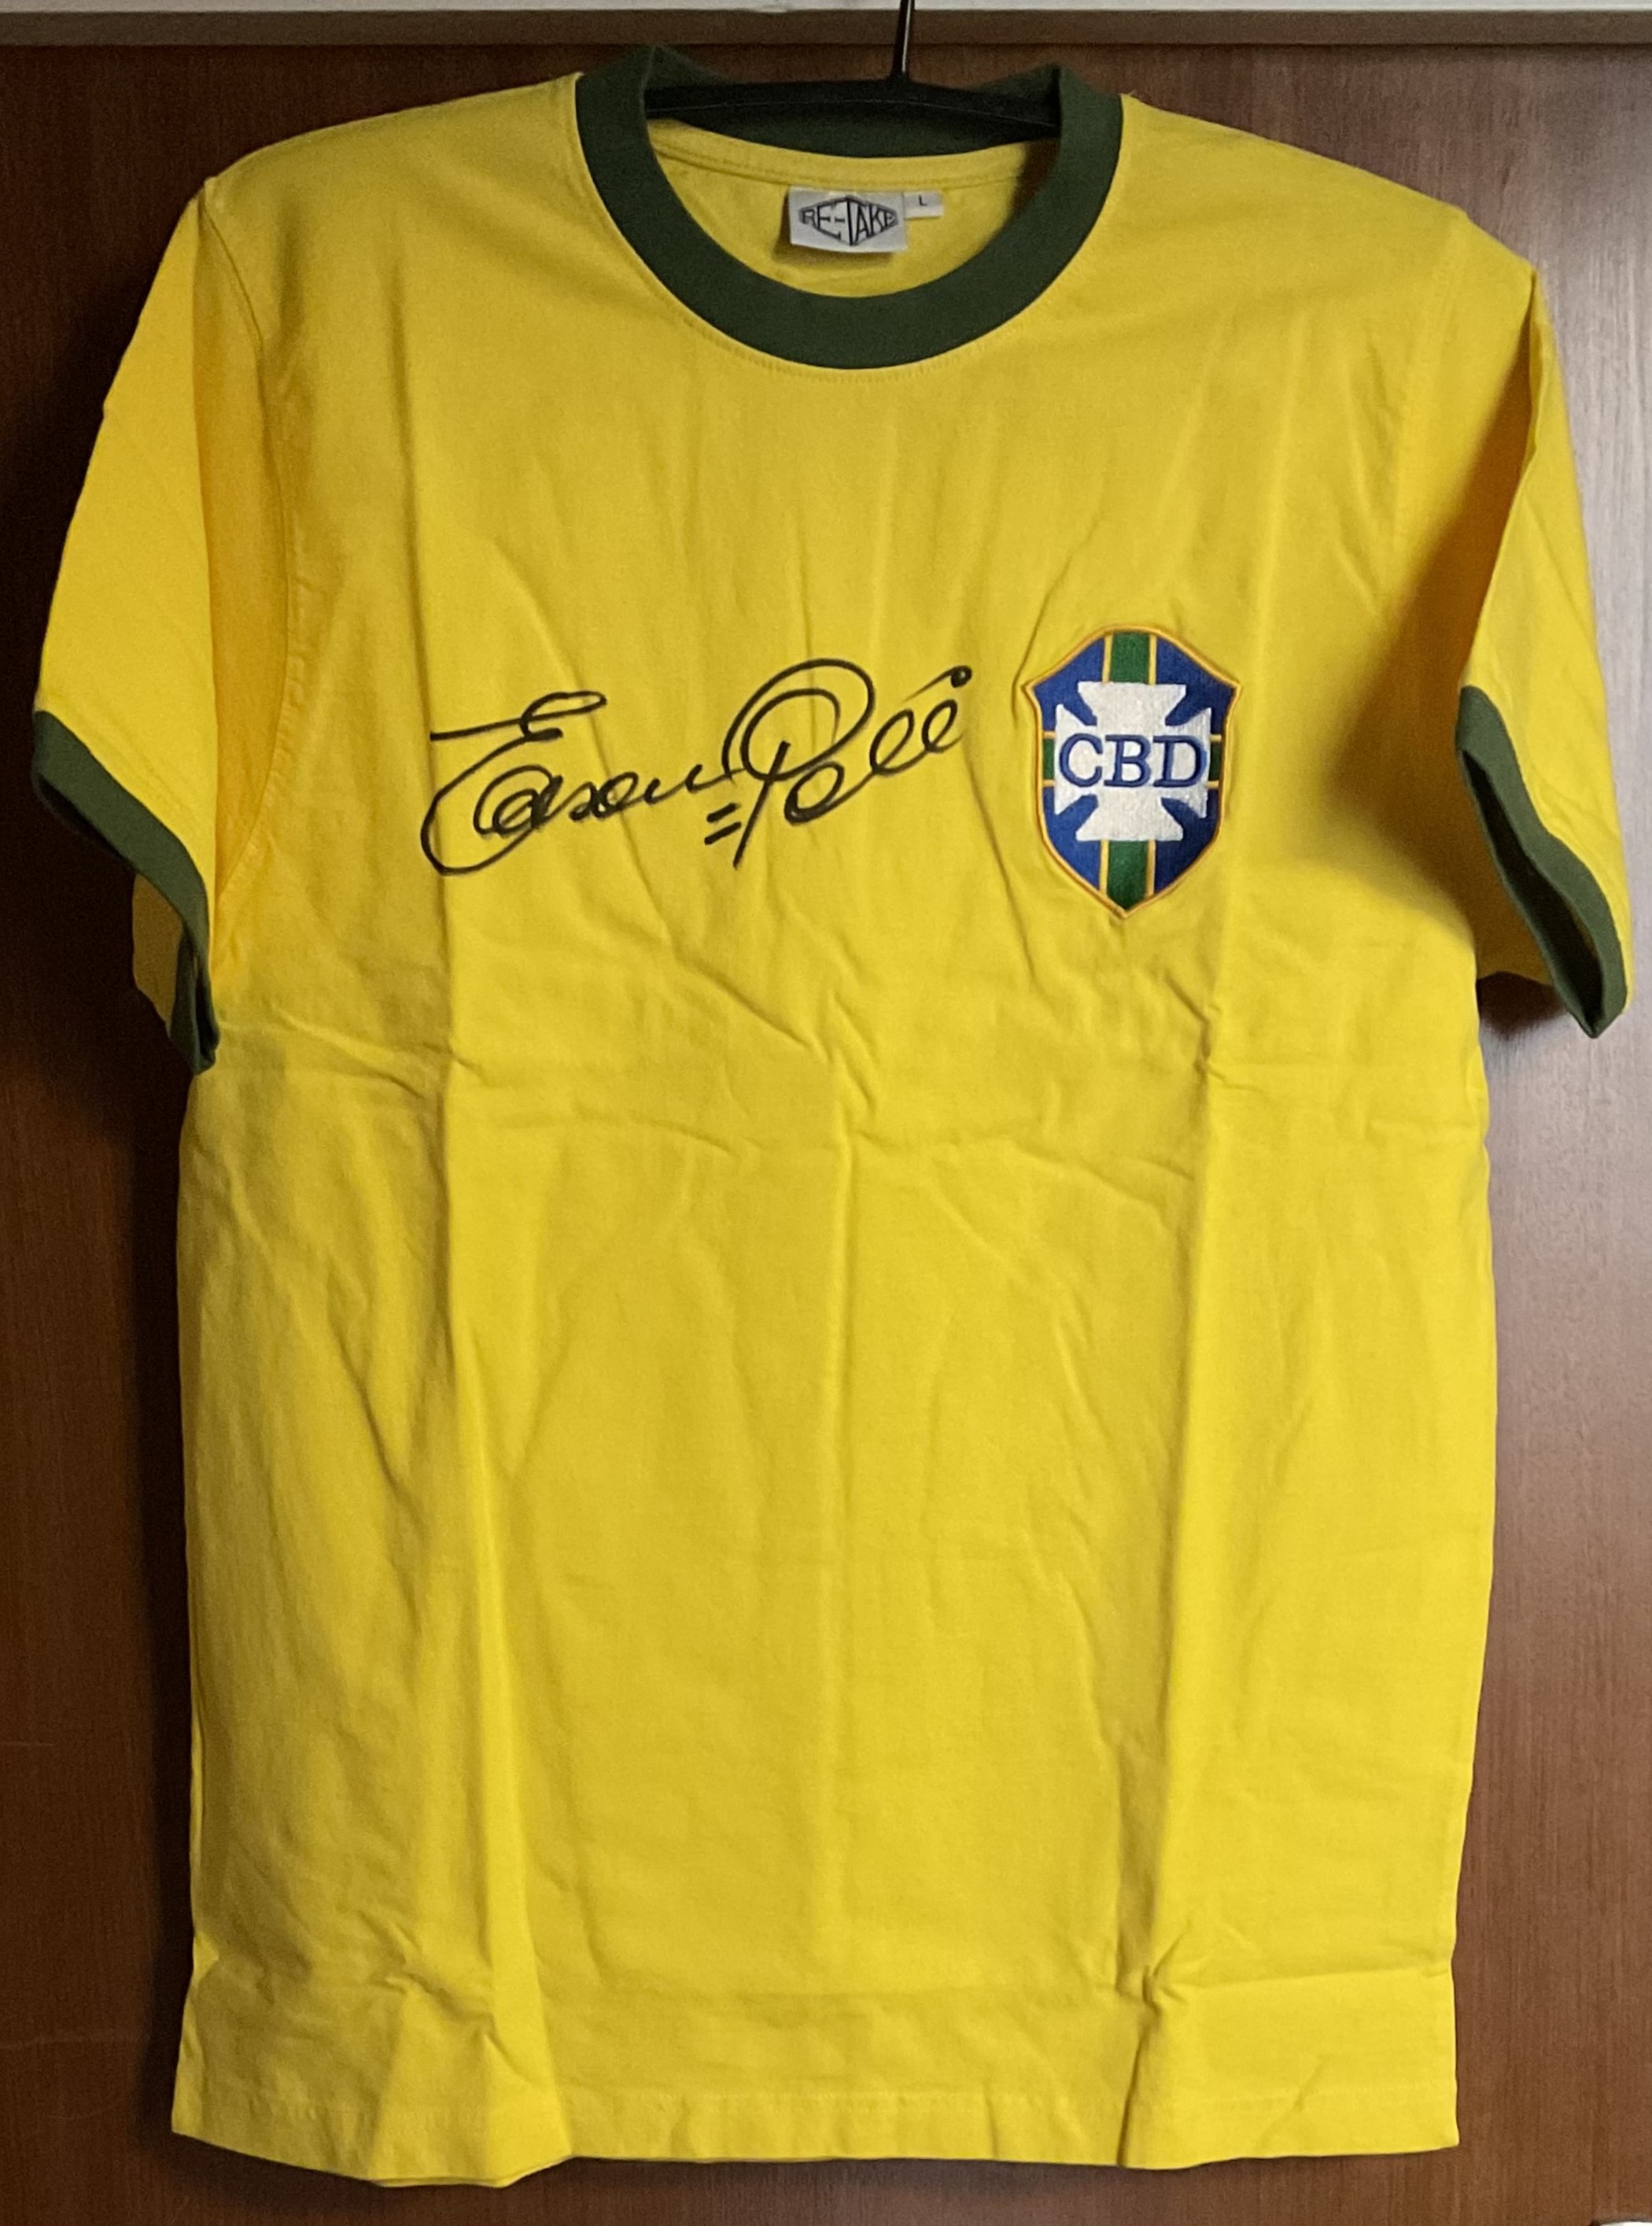 Pele signed retro Brazil football shirt includes full signature size large. Good condition. All